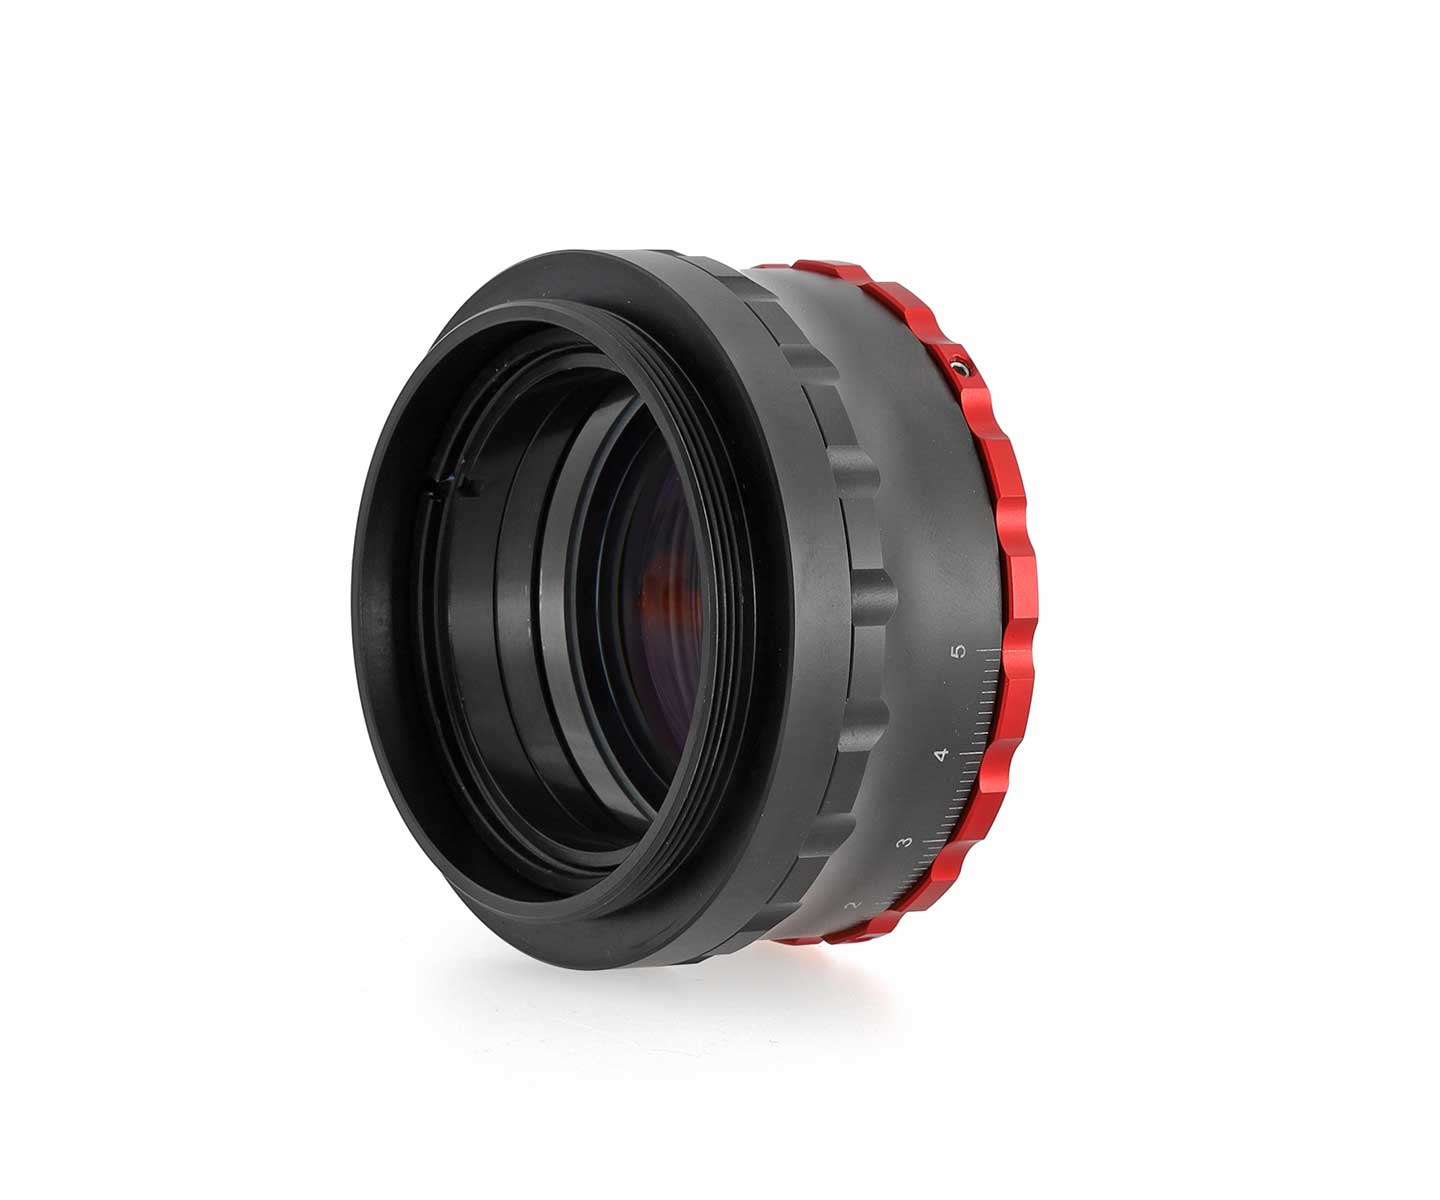  The corrector is optimized for the TS 140 mm f/6.5 APO and ED refractor telescopes and corrects the field of view for astrophotography up to full frame format. [EN] 